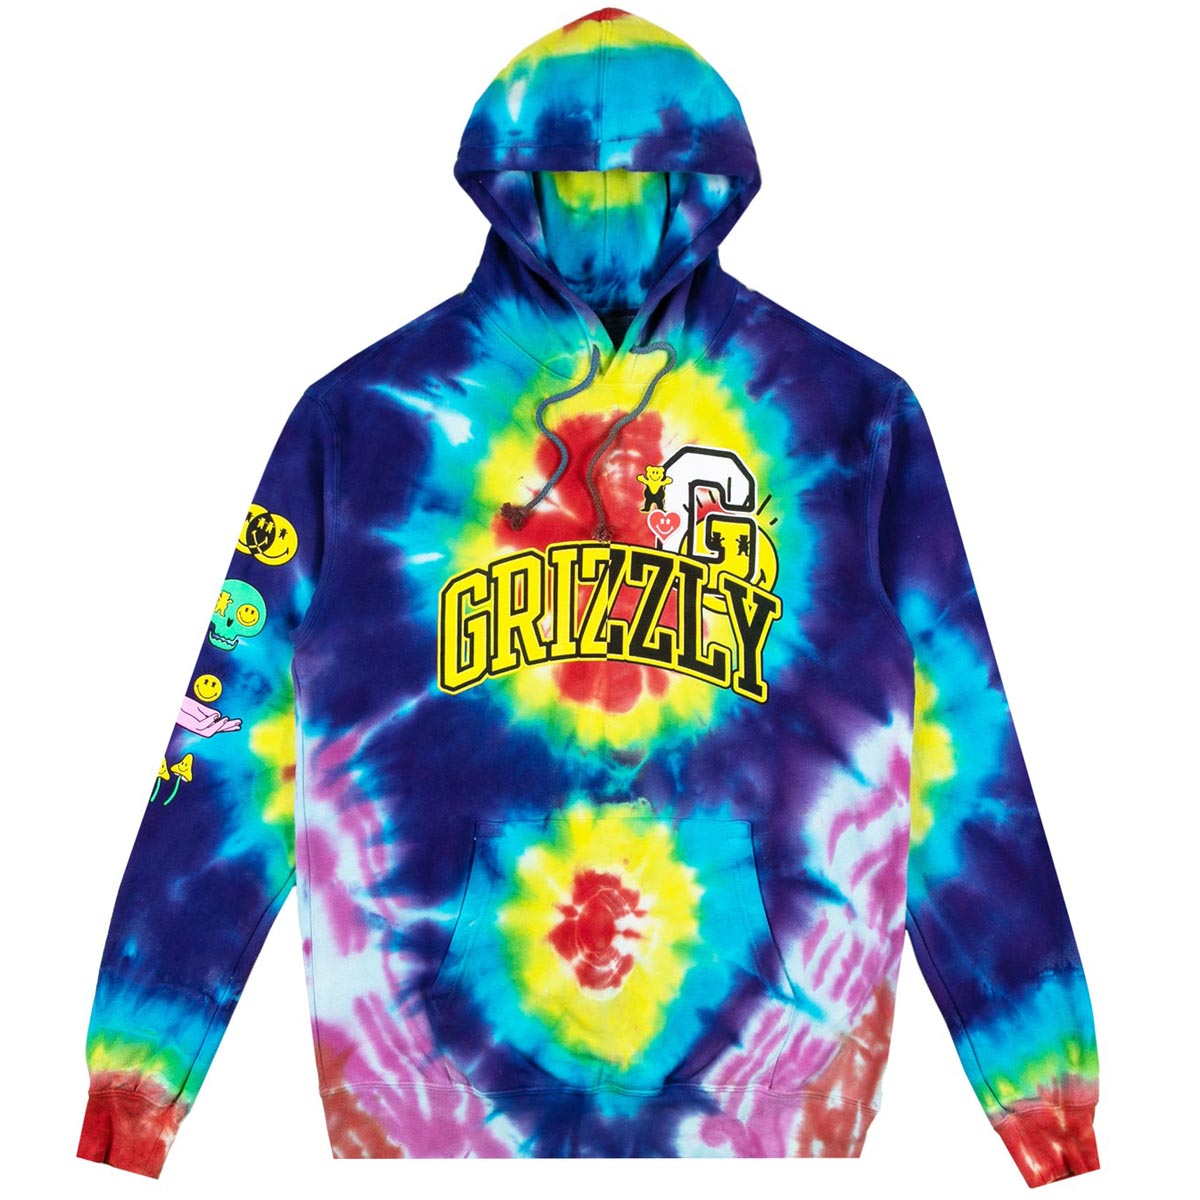 Grizzly x Smiley World Hoodie - Tie Dye image 1